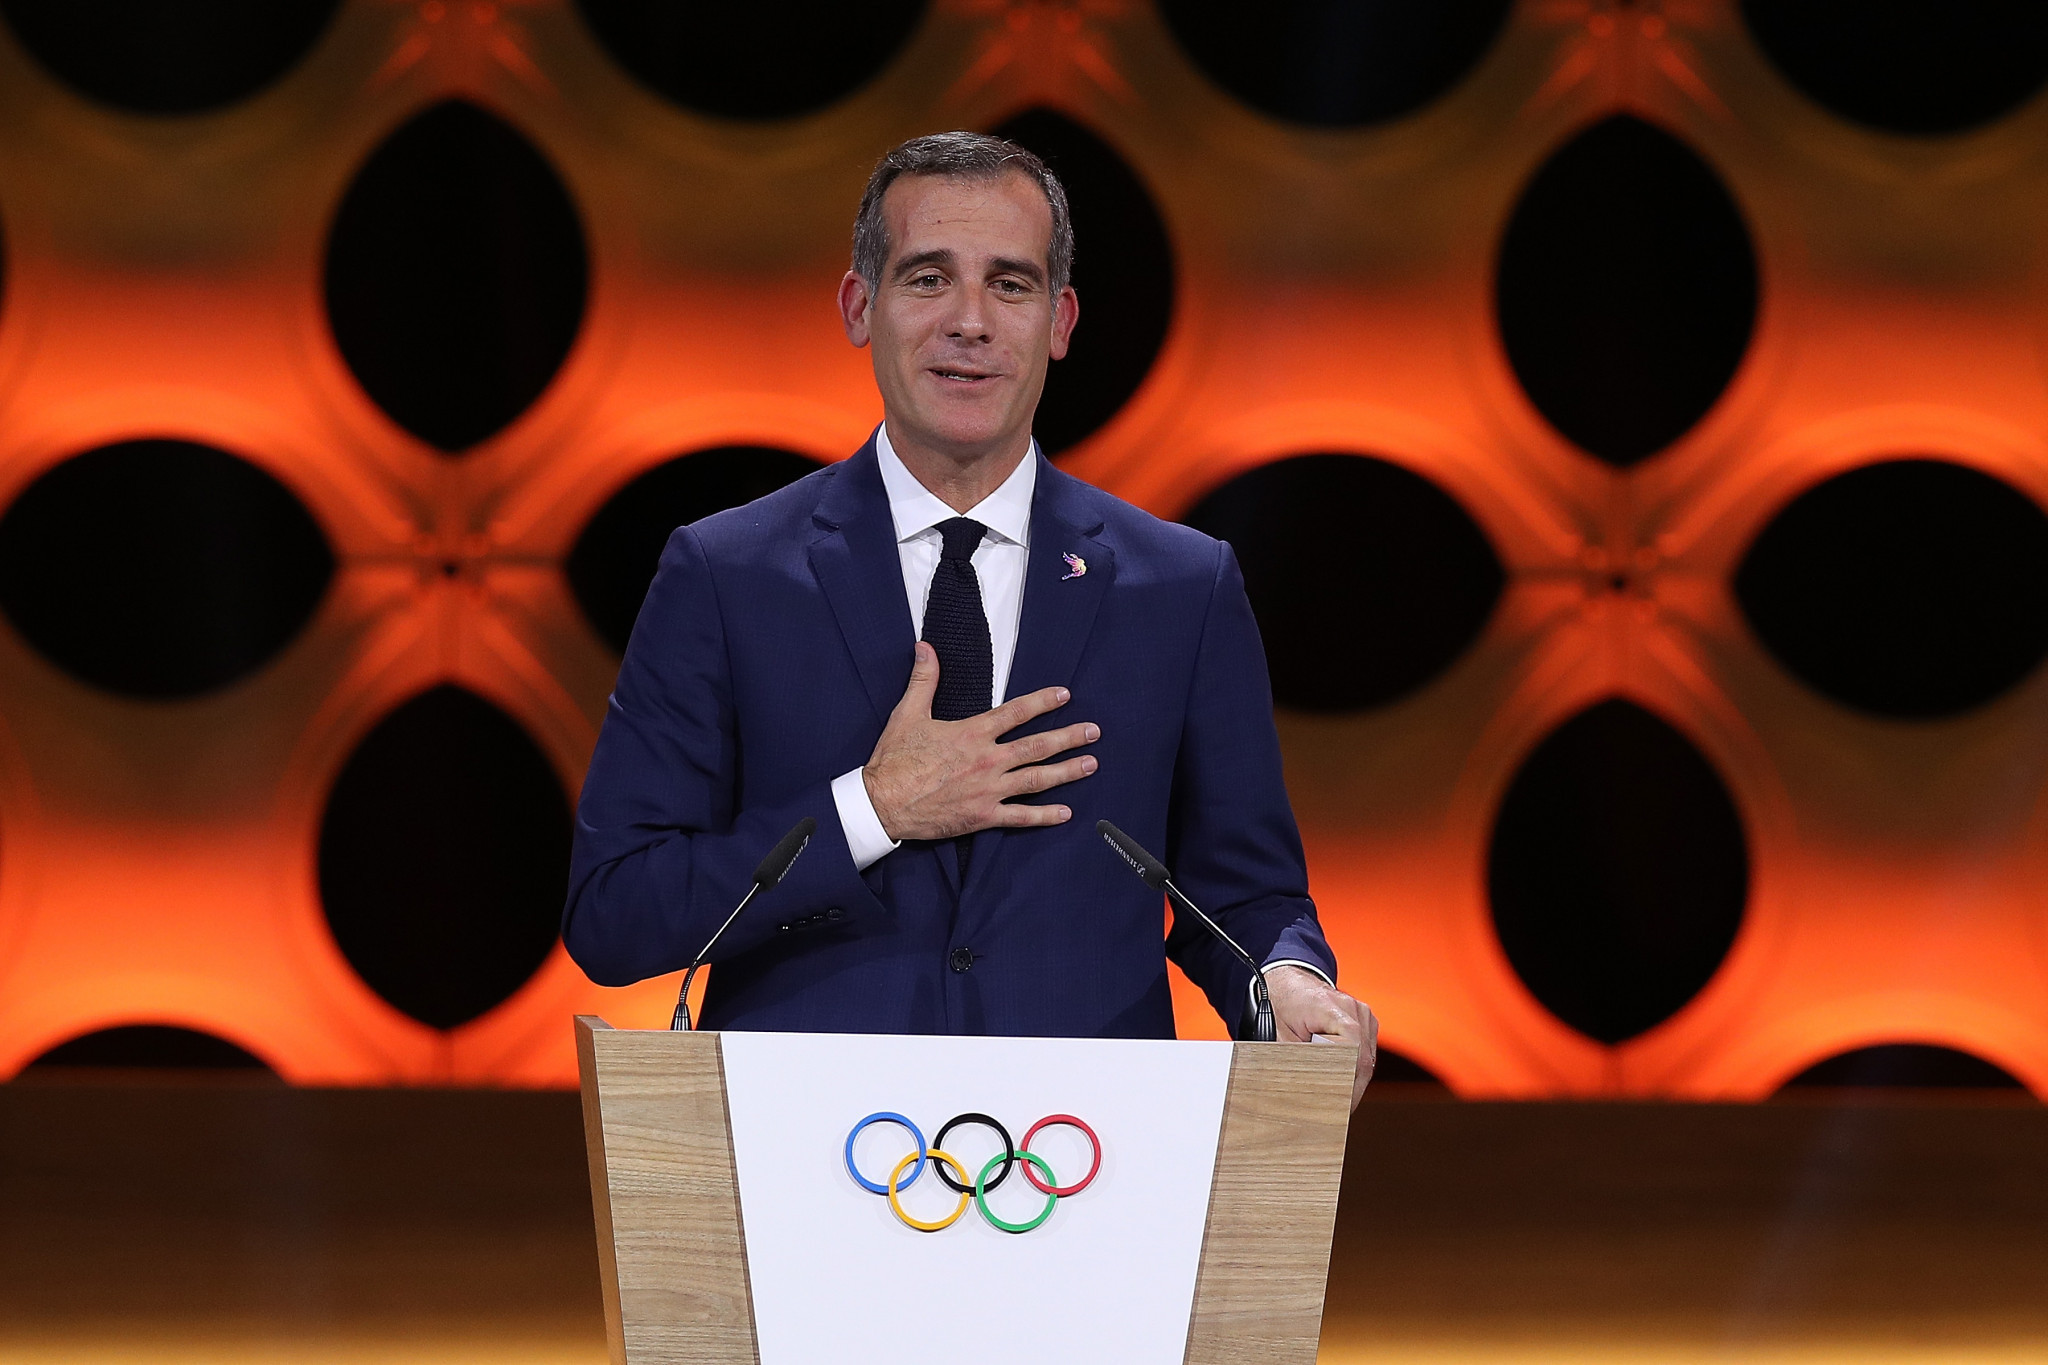 Los Angeles Mayor Eric Garcetti has had the go-ahead to sign a MoU to establish the California Olympic and Paralympic Safety Command ©Getty Images